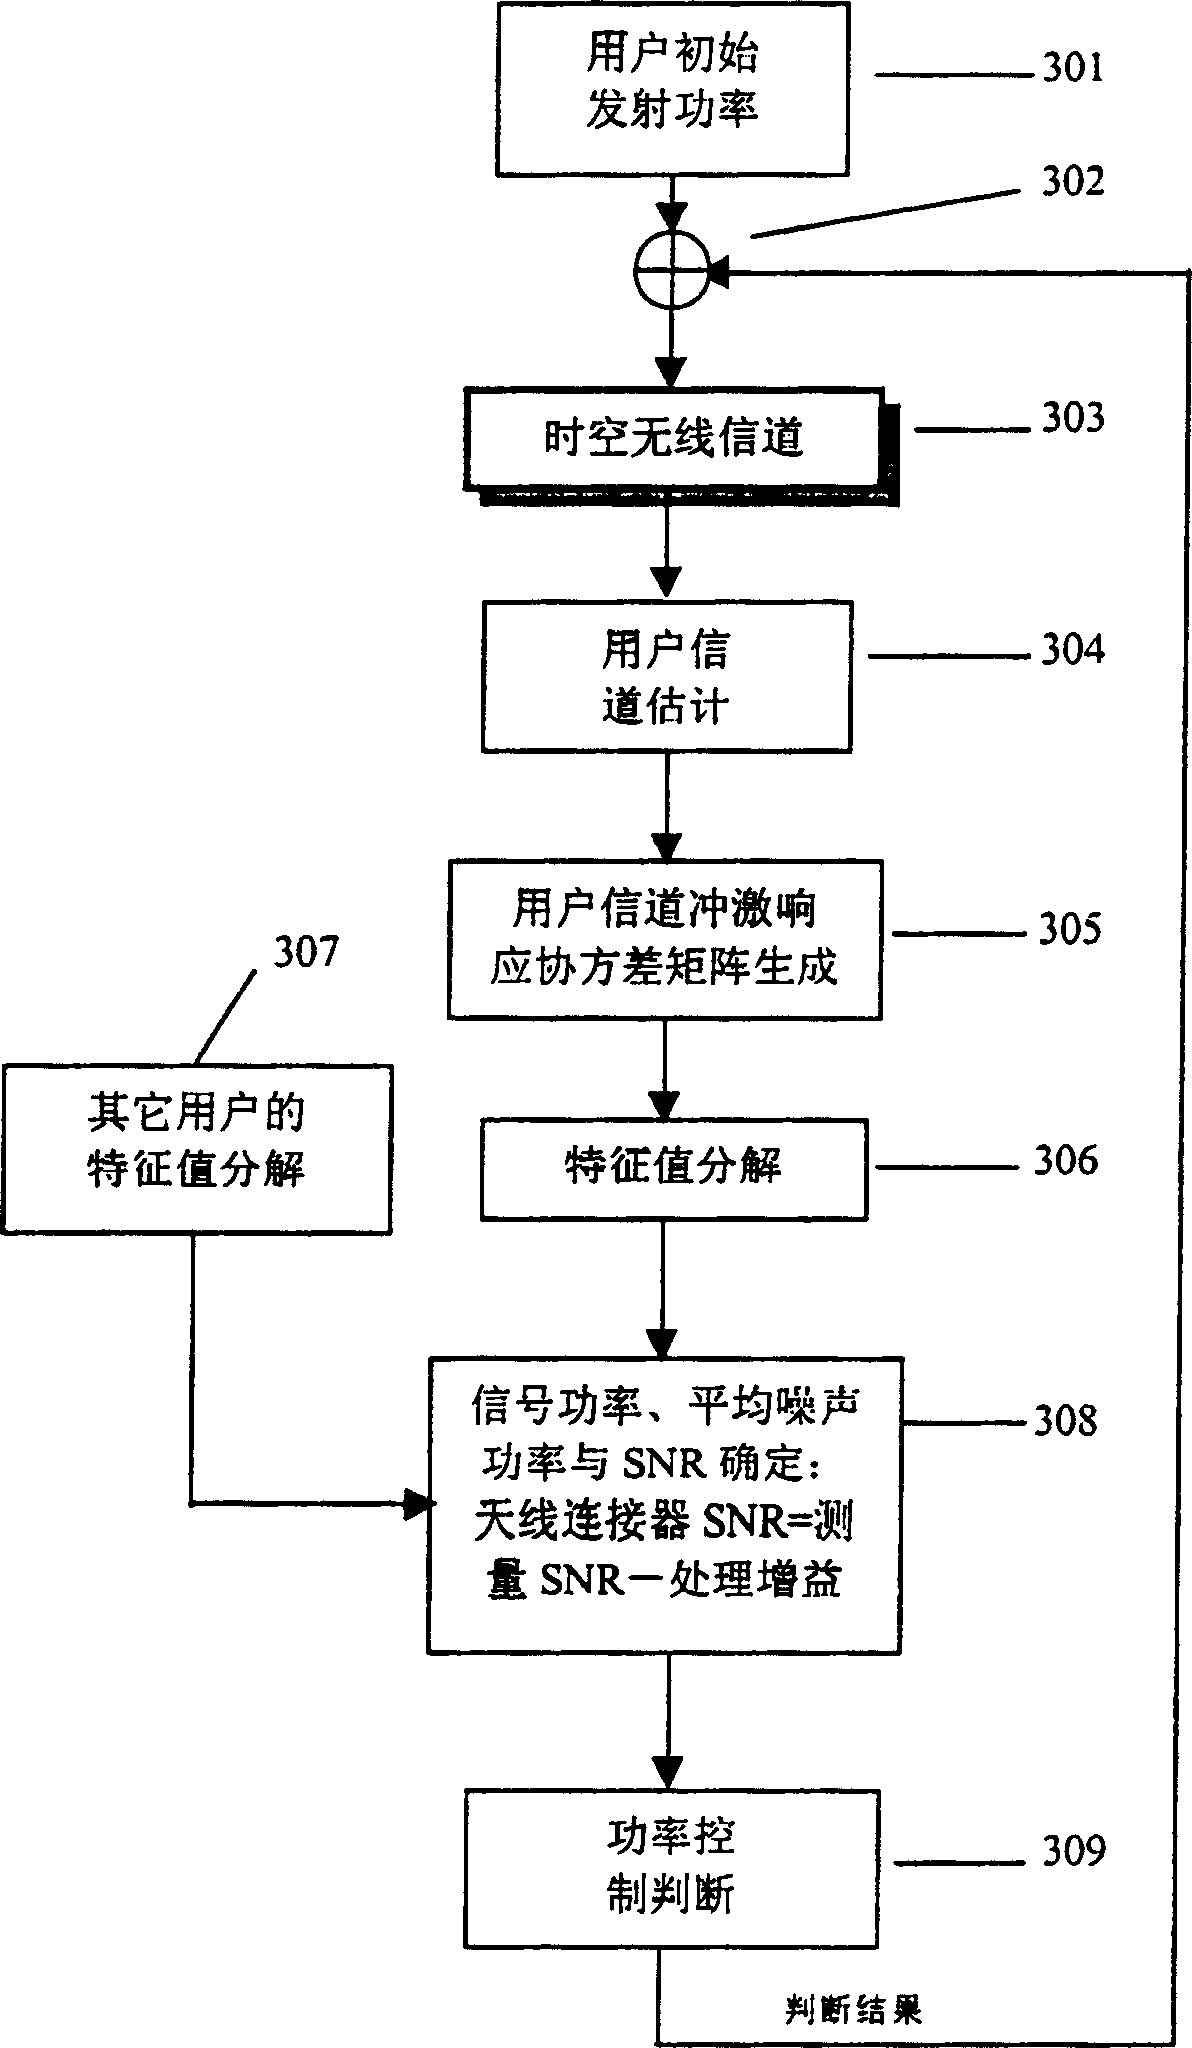 Signal-to-noise ratio measuring method based on array antennas mobile communication system